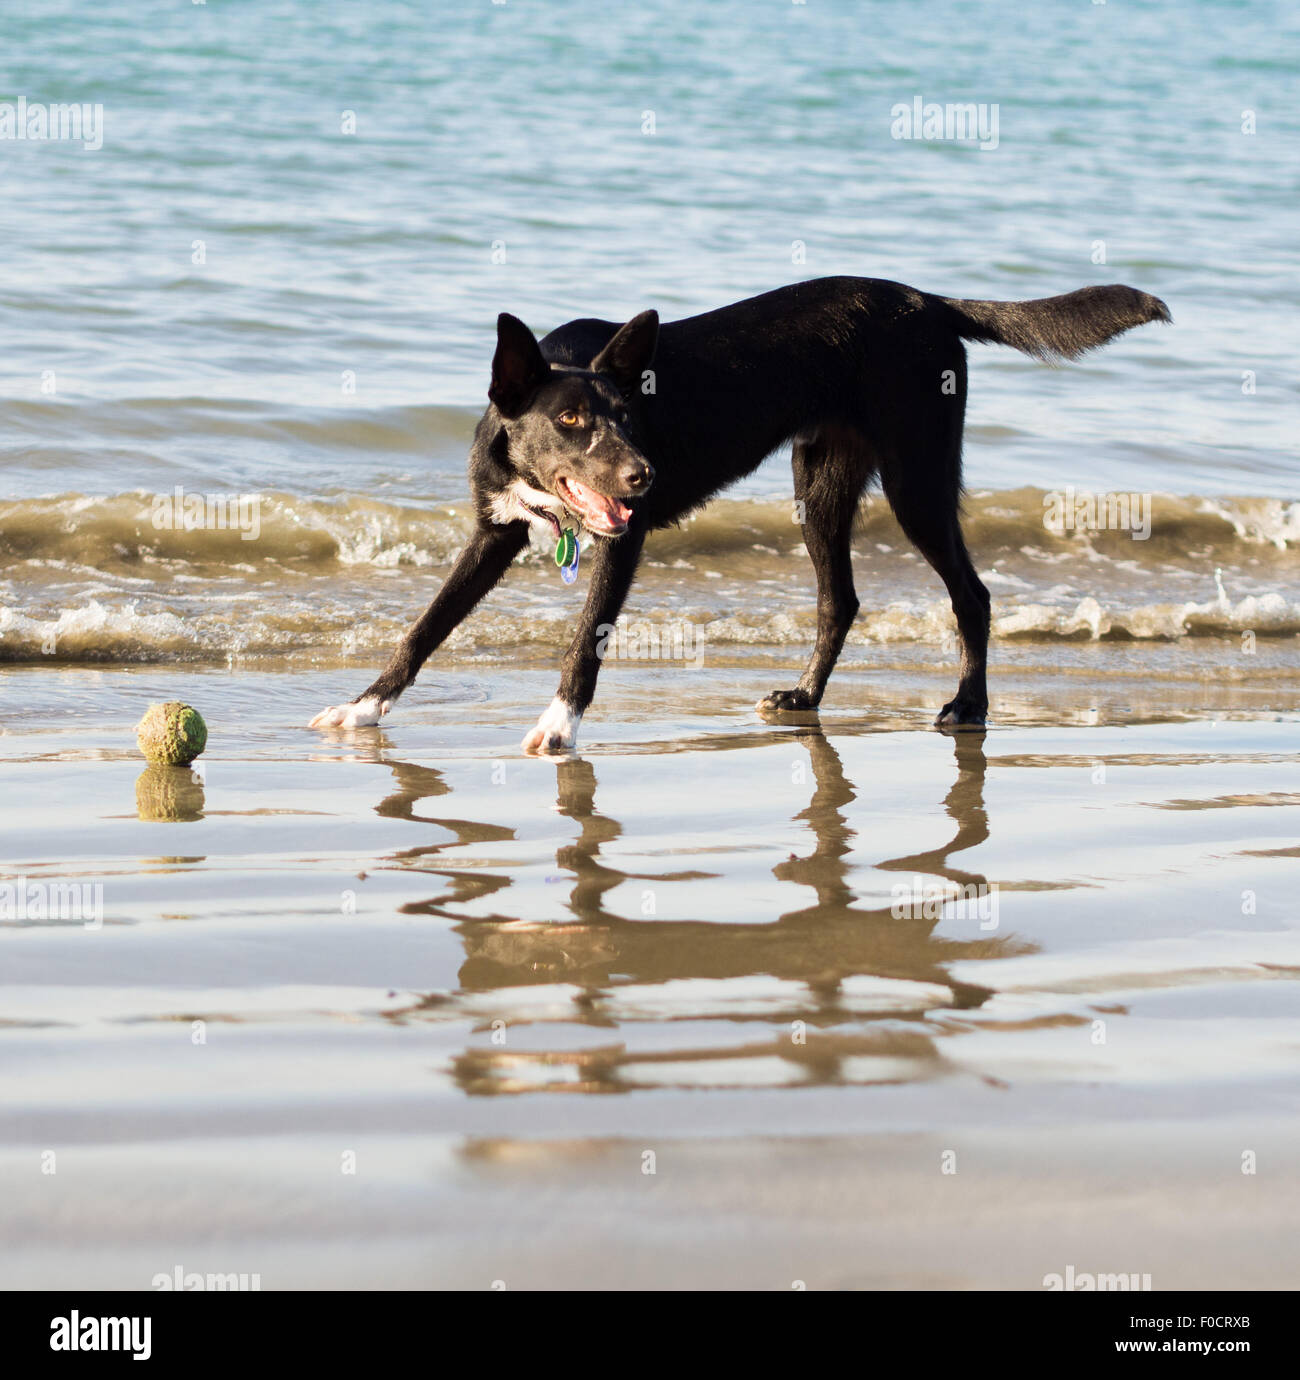 dog playing on the beach with toy Stock Photo